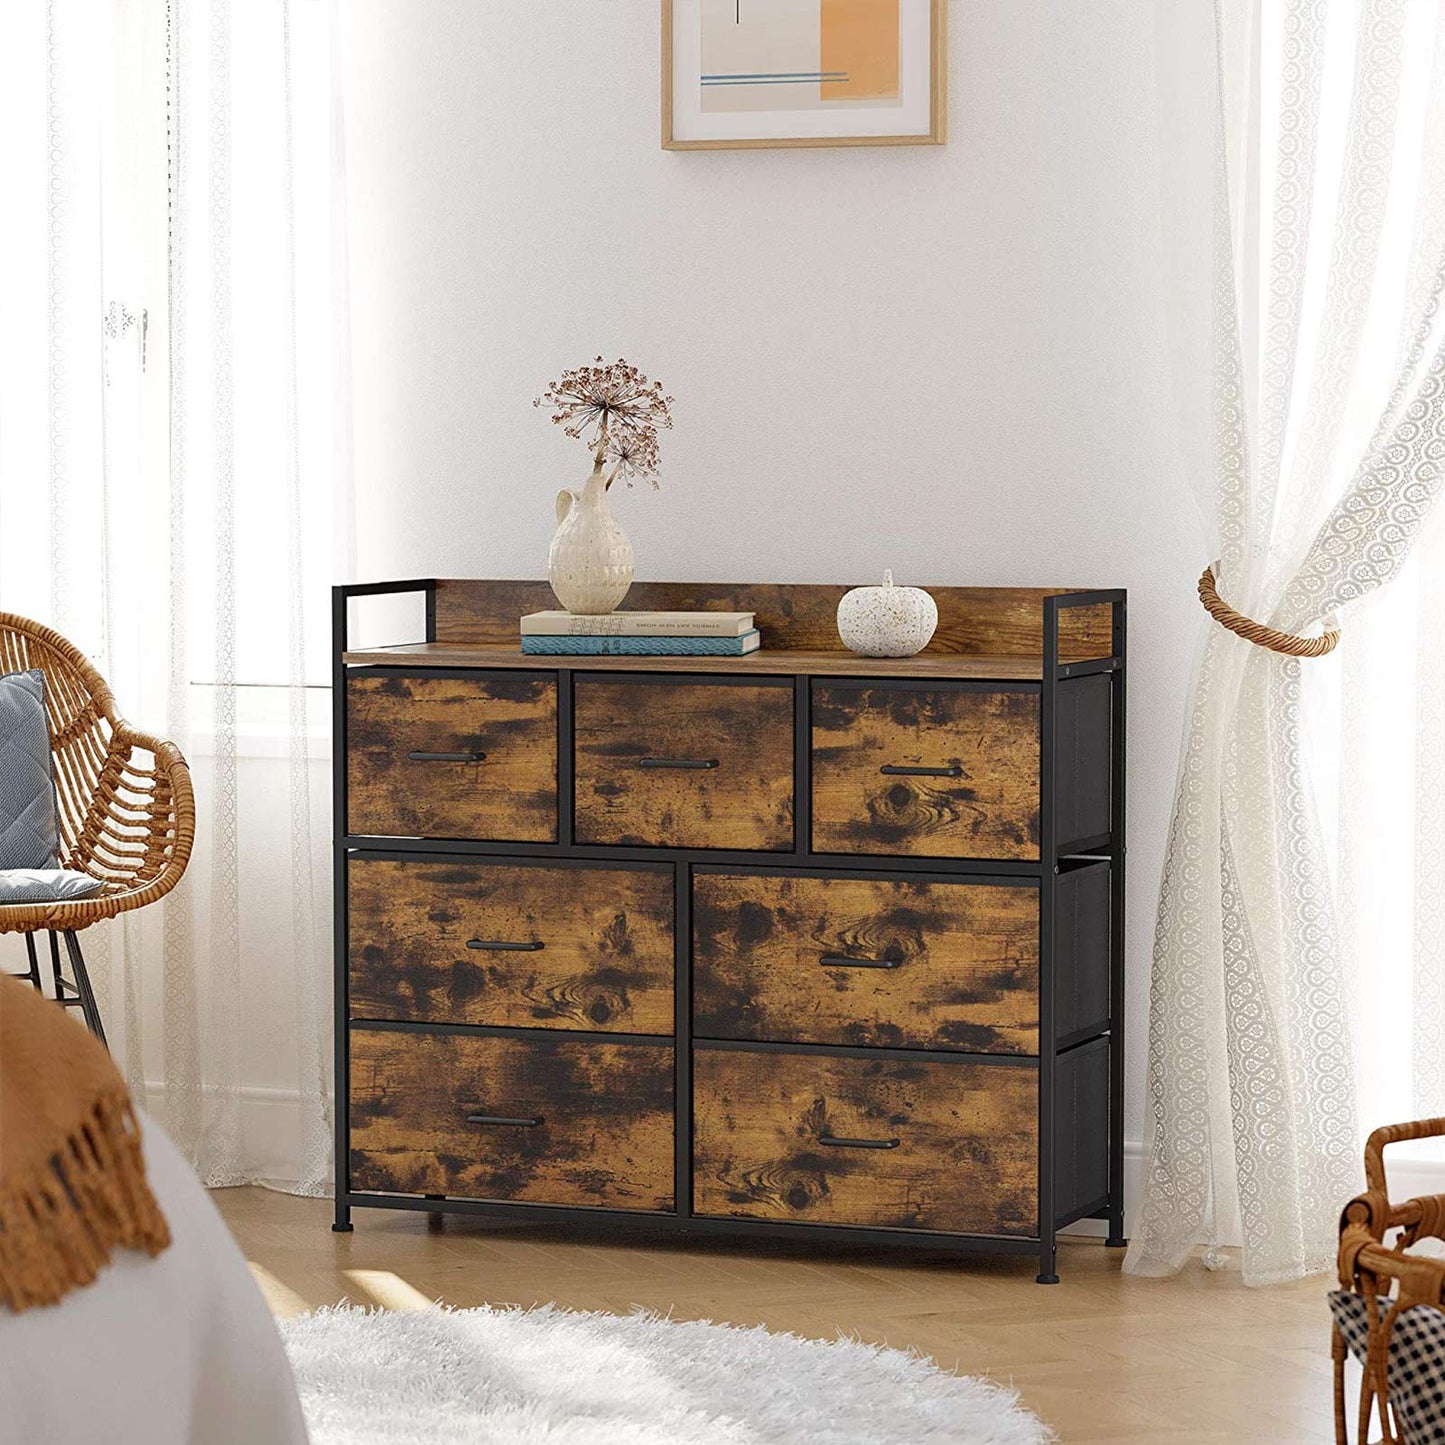 Fabric Chest of Drawers, Bedroom Storage Unit, Cabinet Dresser with 7 Drawers, with Metal Frame and Handles, SONGMICS, 3